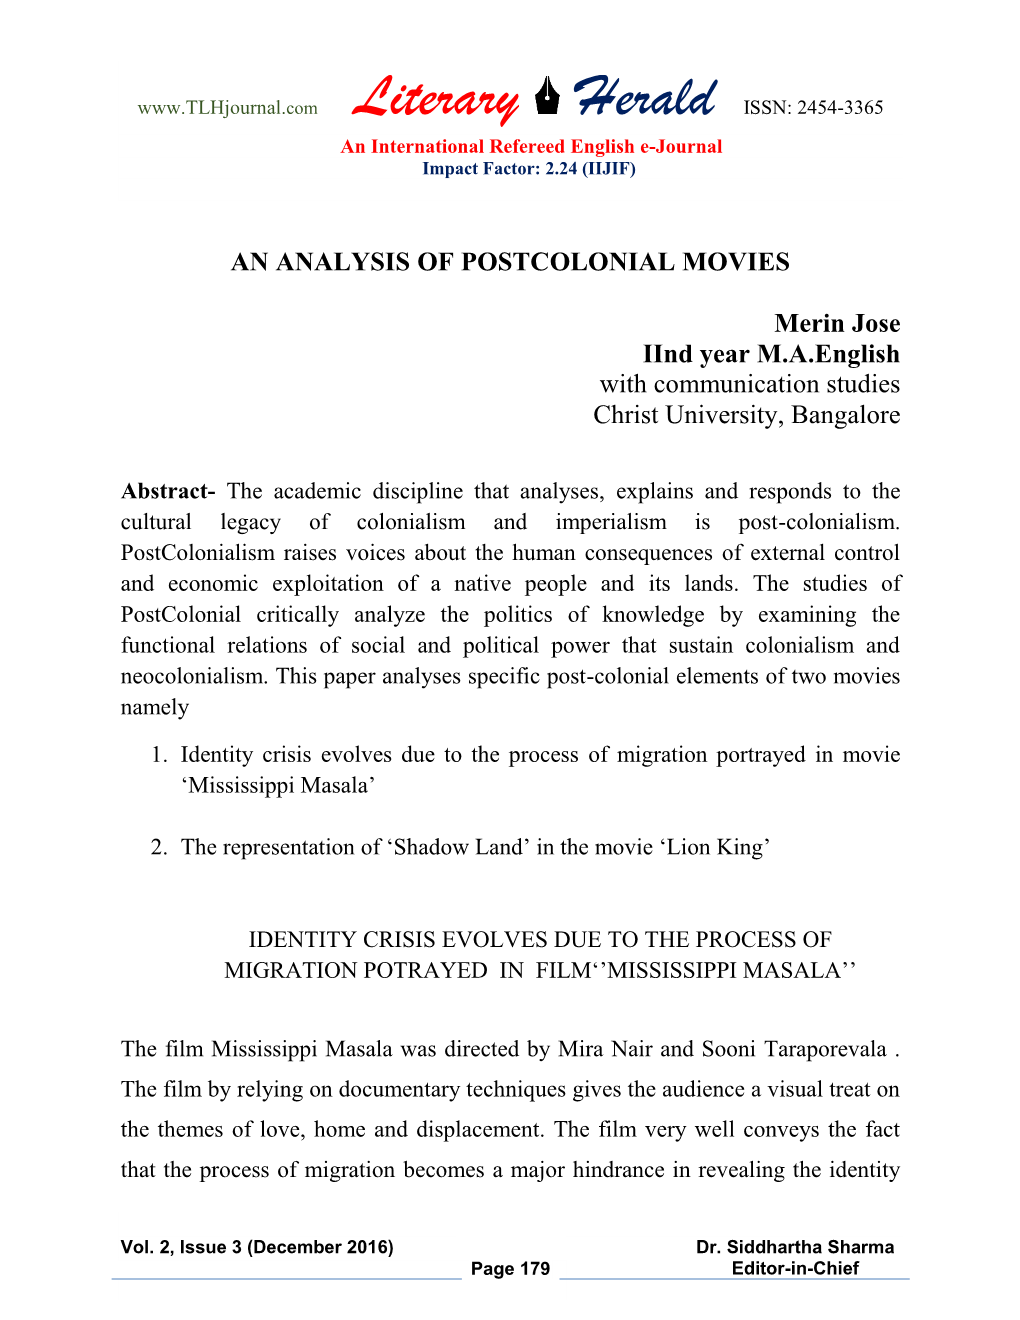 AN ANALYSIS of POSTCOLONIAL MOVIES Merin Jose Iind Year M.A